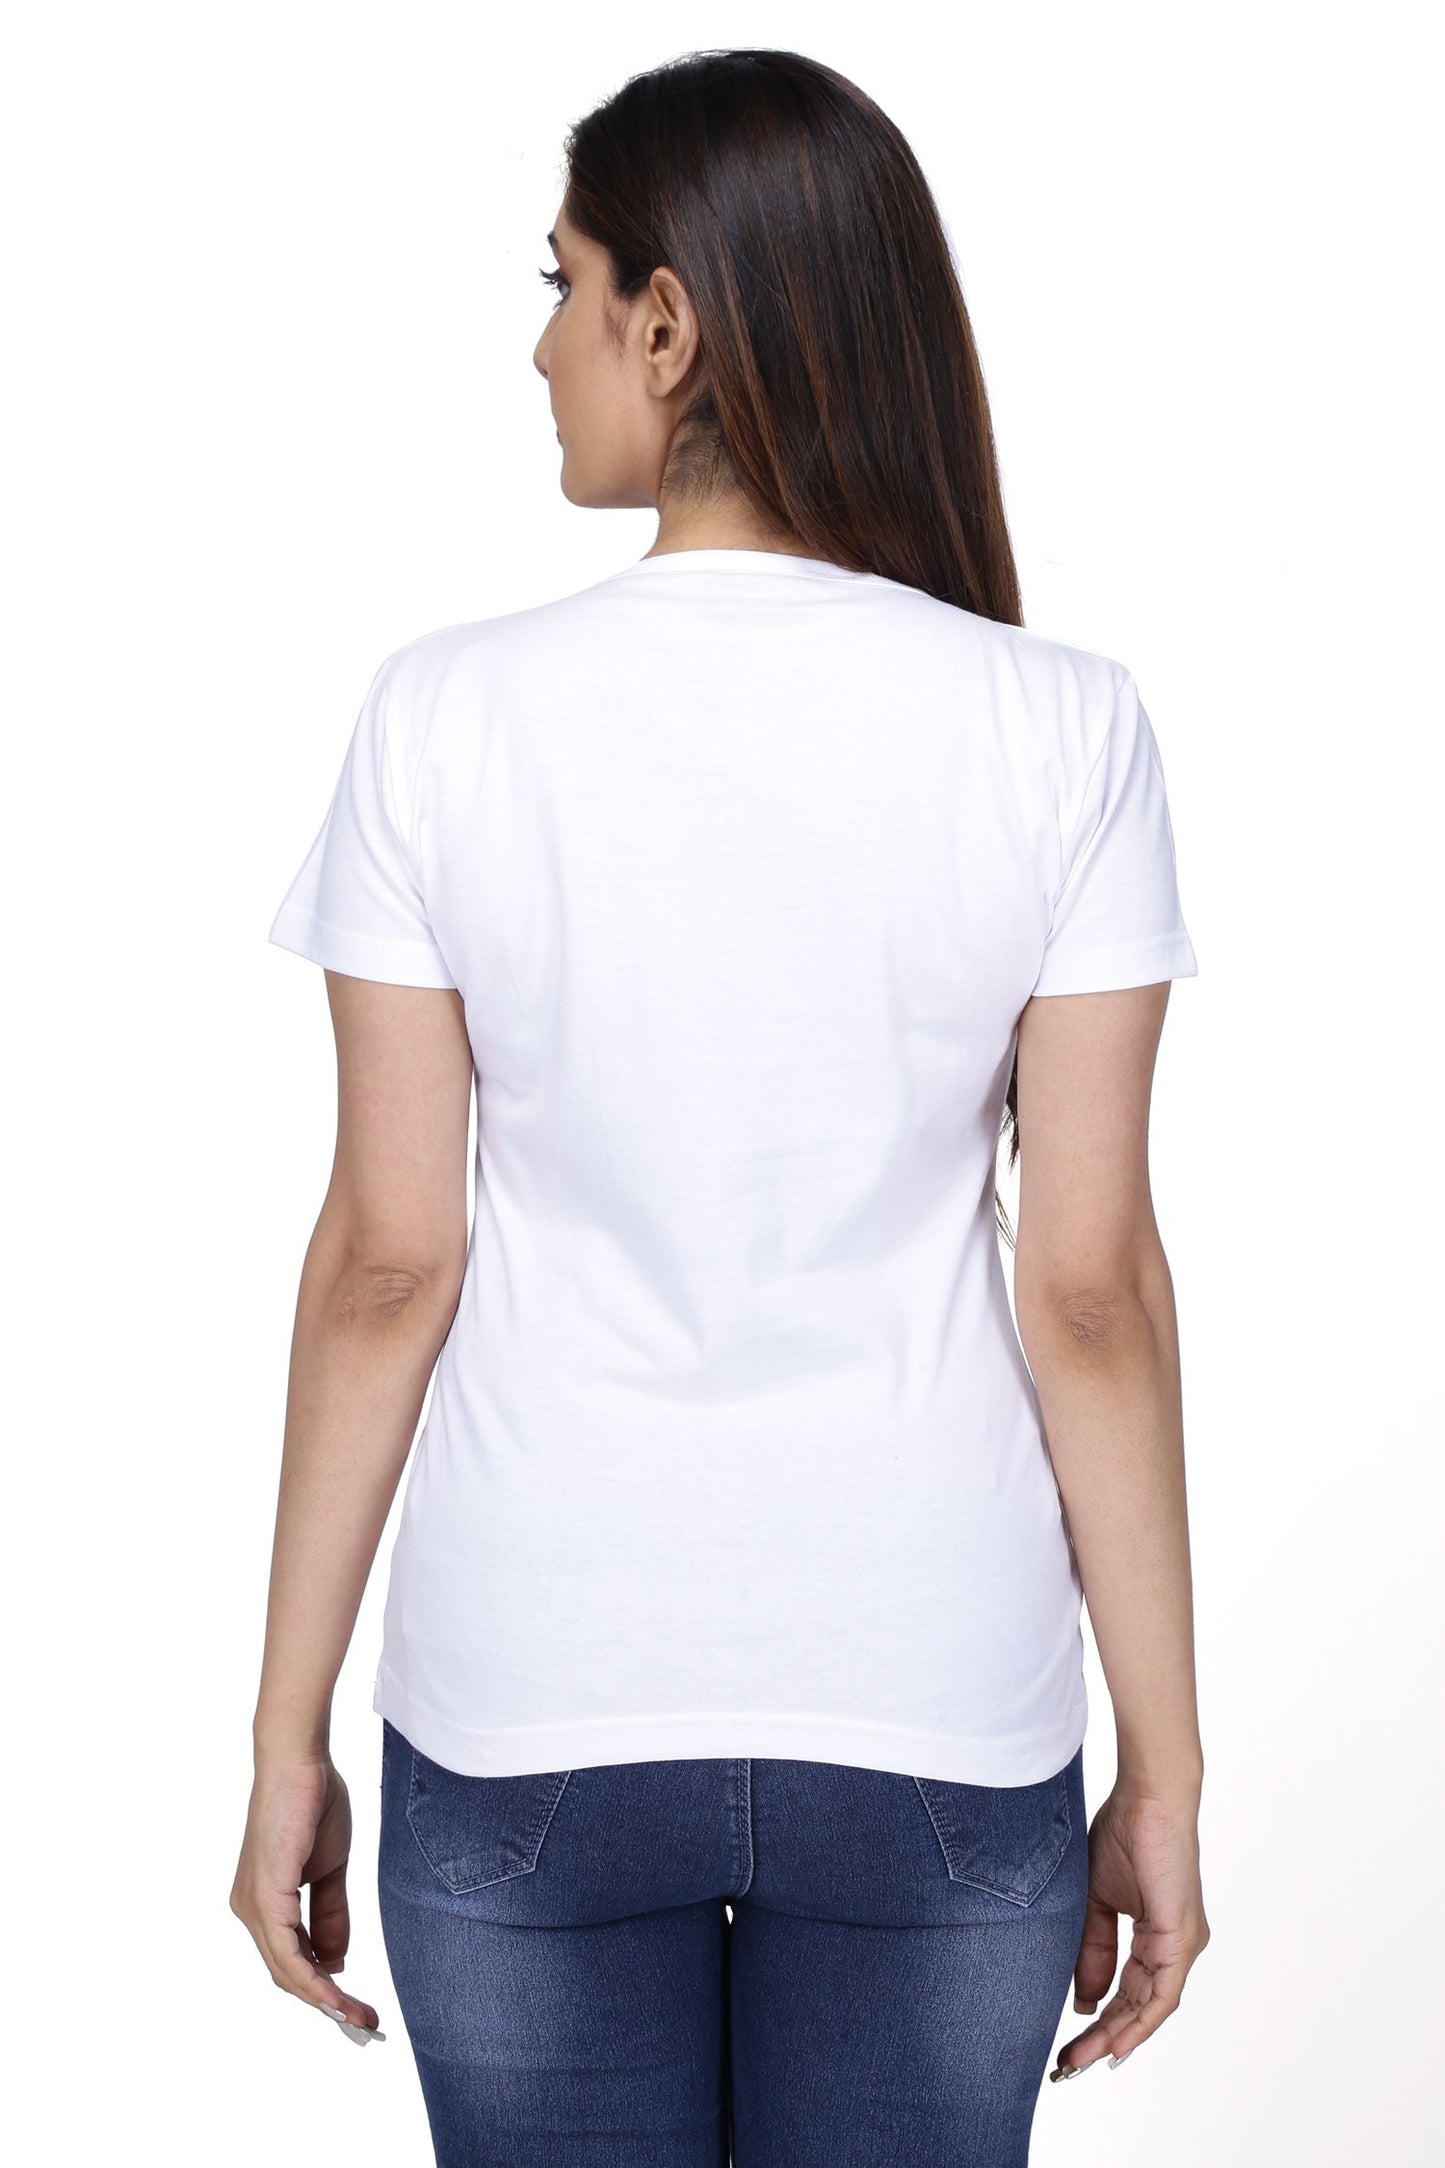 NEO GARMENTS Women's Cotton Round Neck T-shirt - PANDA. | SIZE FROM S-32" TO 8XL-52"